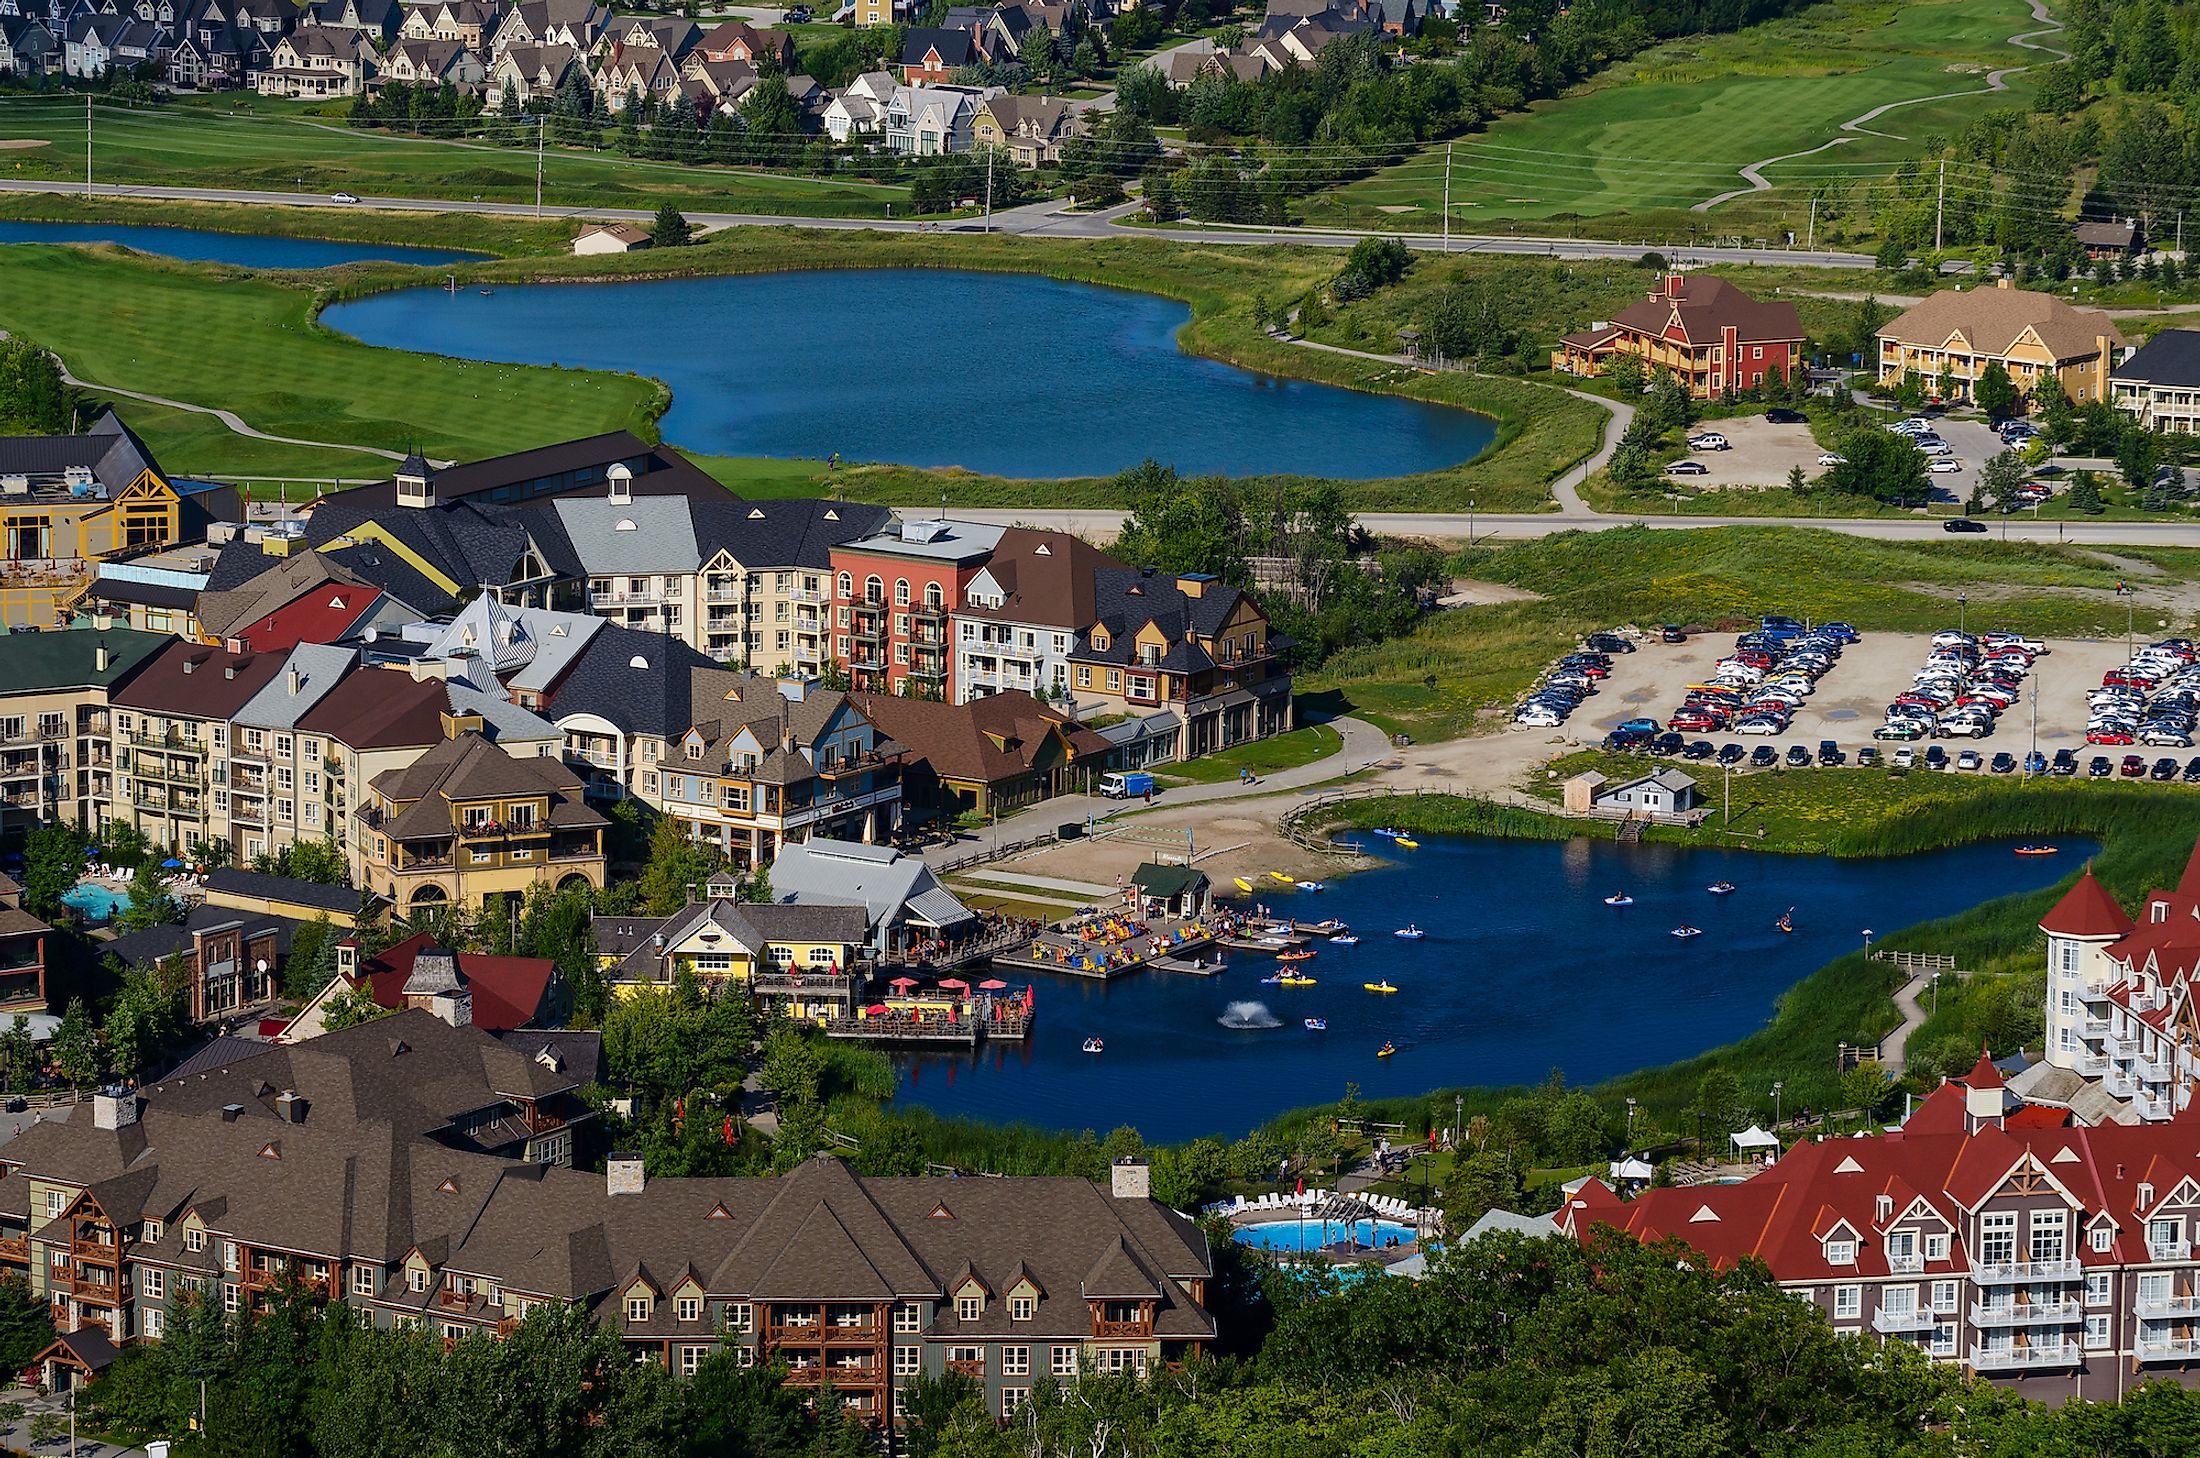 Resort buildings and ponds in Blue Mountain village in Collingwood, Ontario.